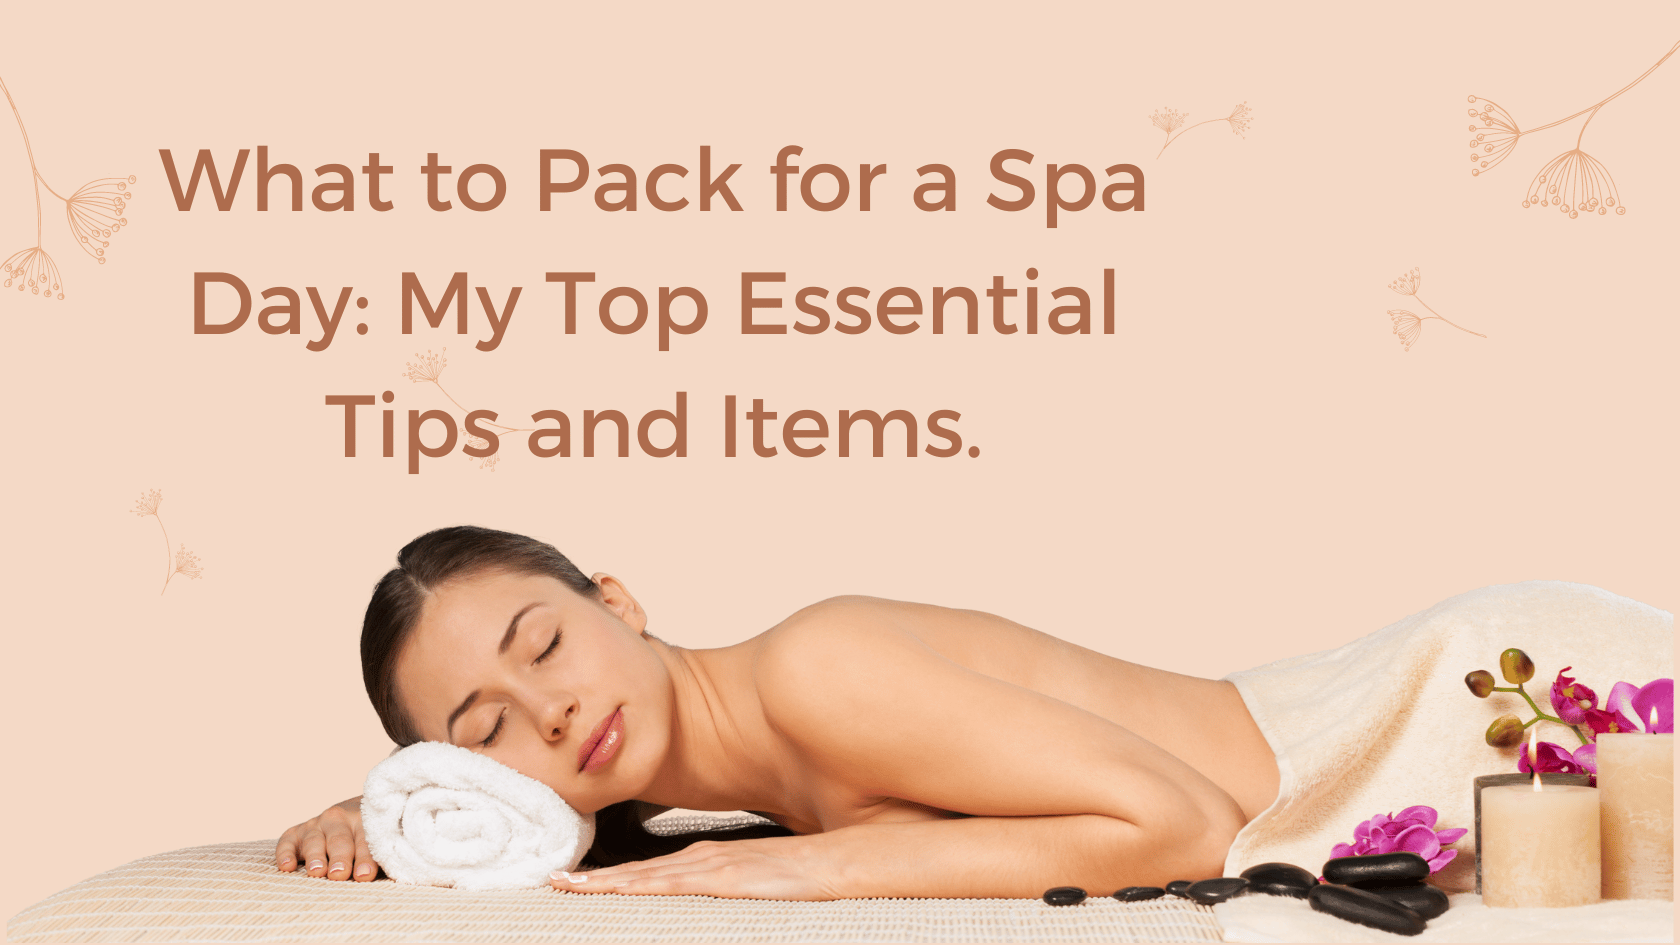 What to Pack for a Spa Day